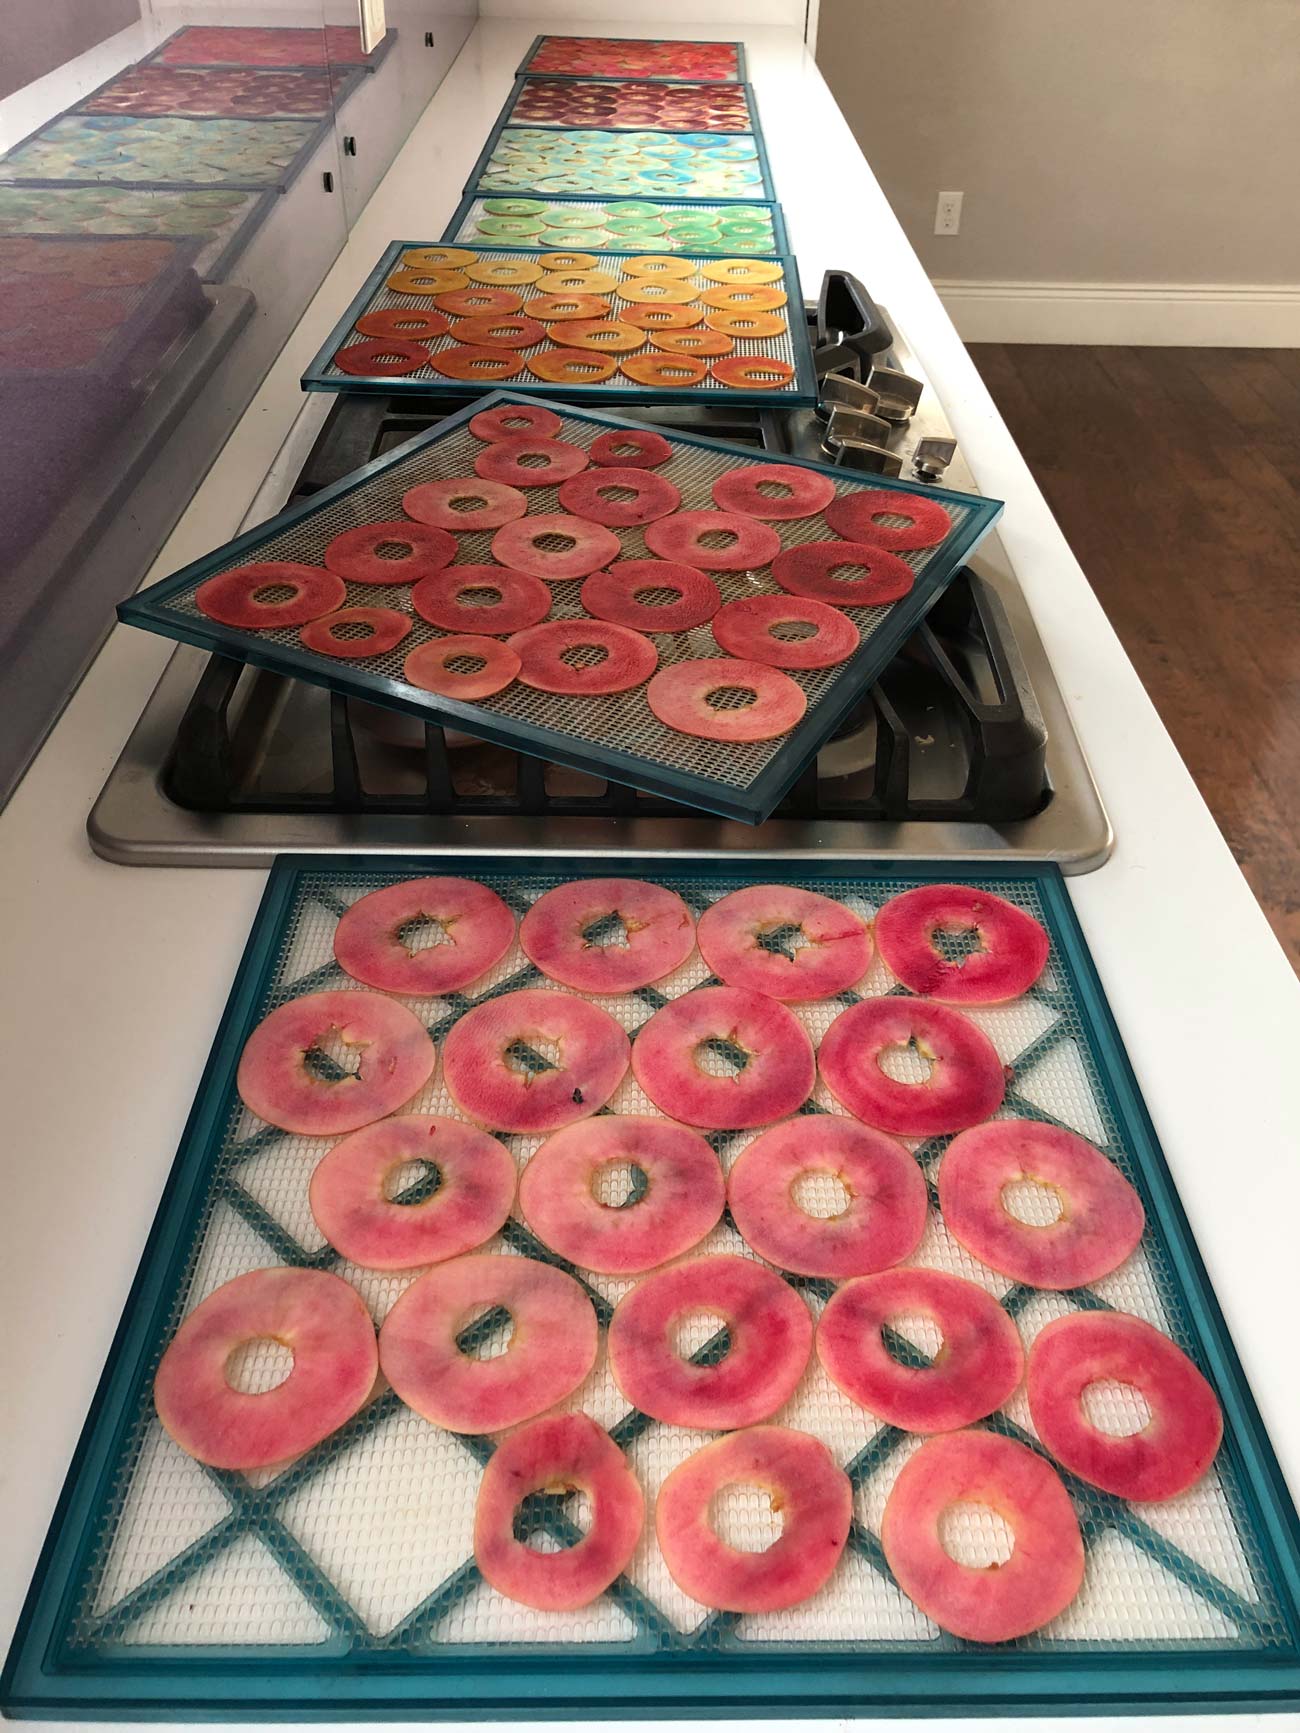 dehydrator trays filled with rainbow colored apple slices ready to dehydrate